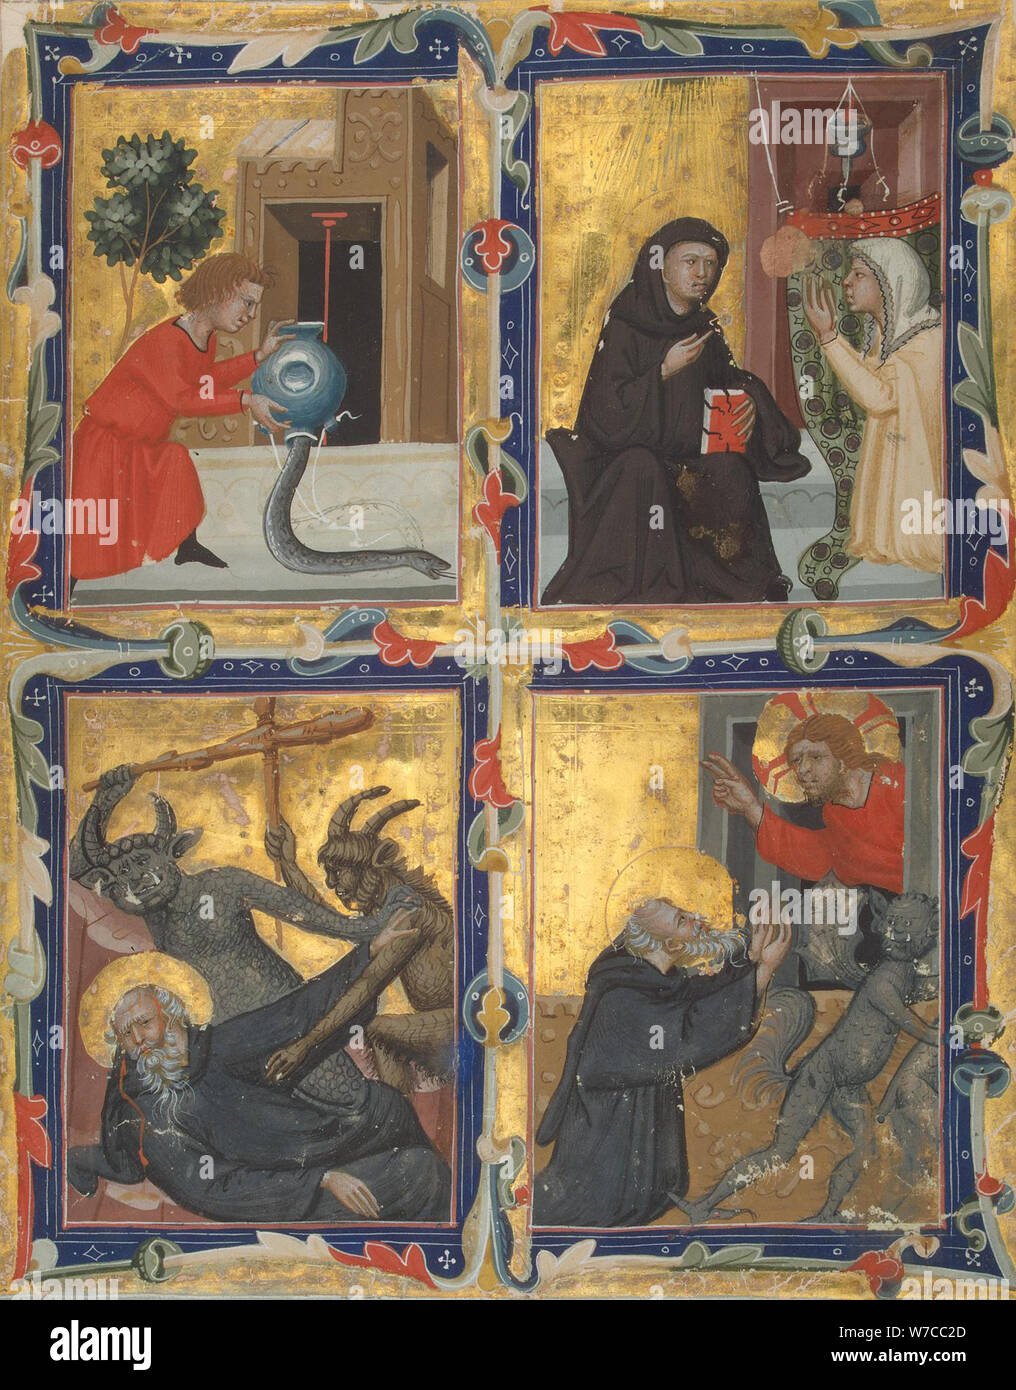 Scenes from the Lives of Saints Benedict of Nursia and Anthony the Hermit. Stock Photo